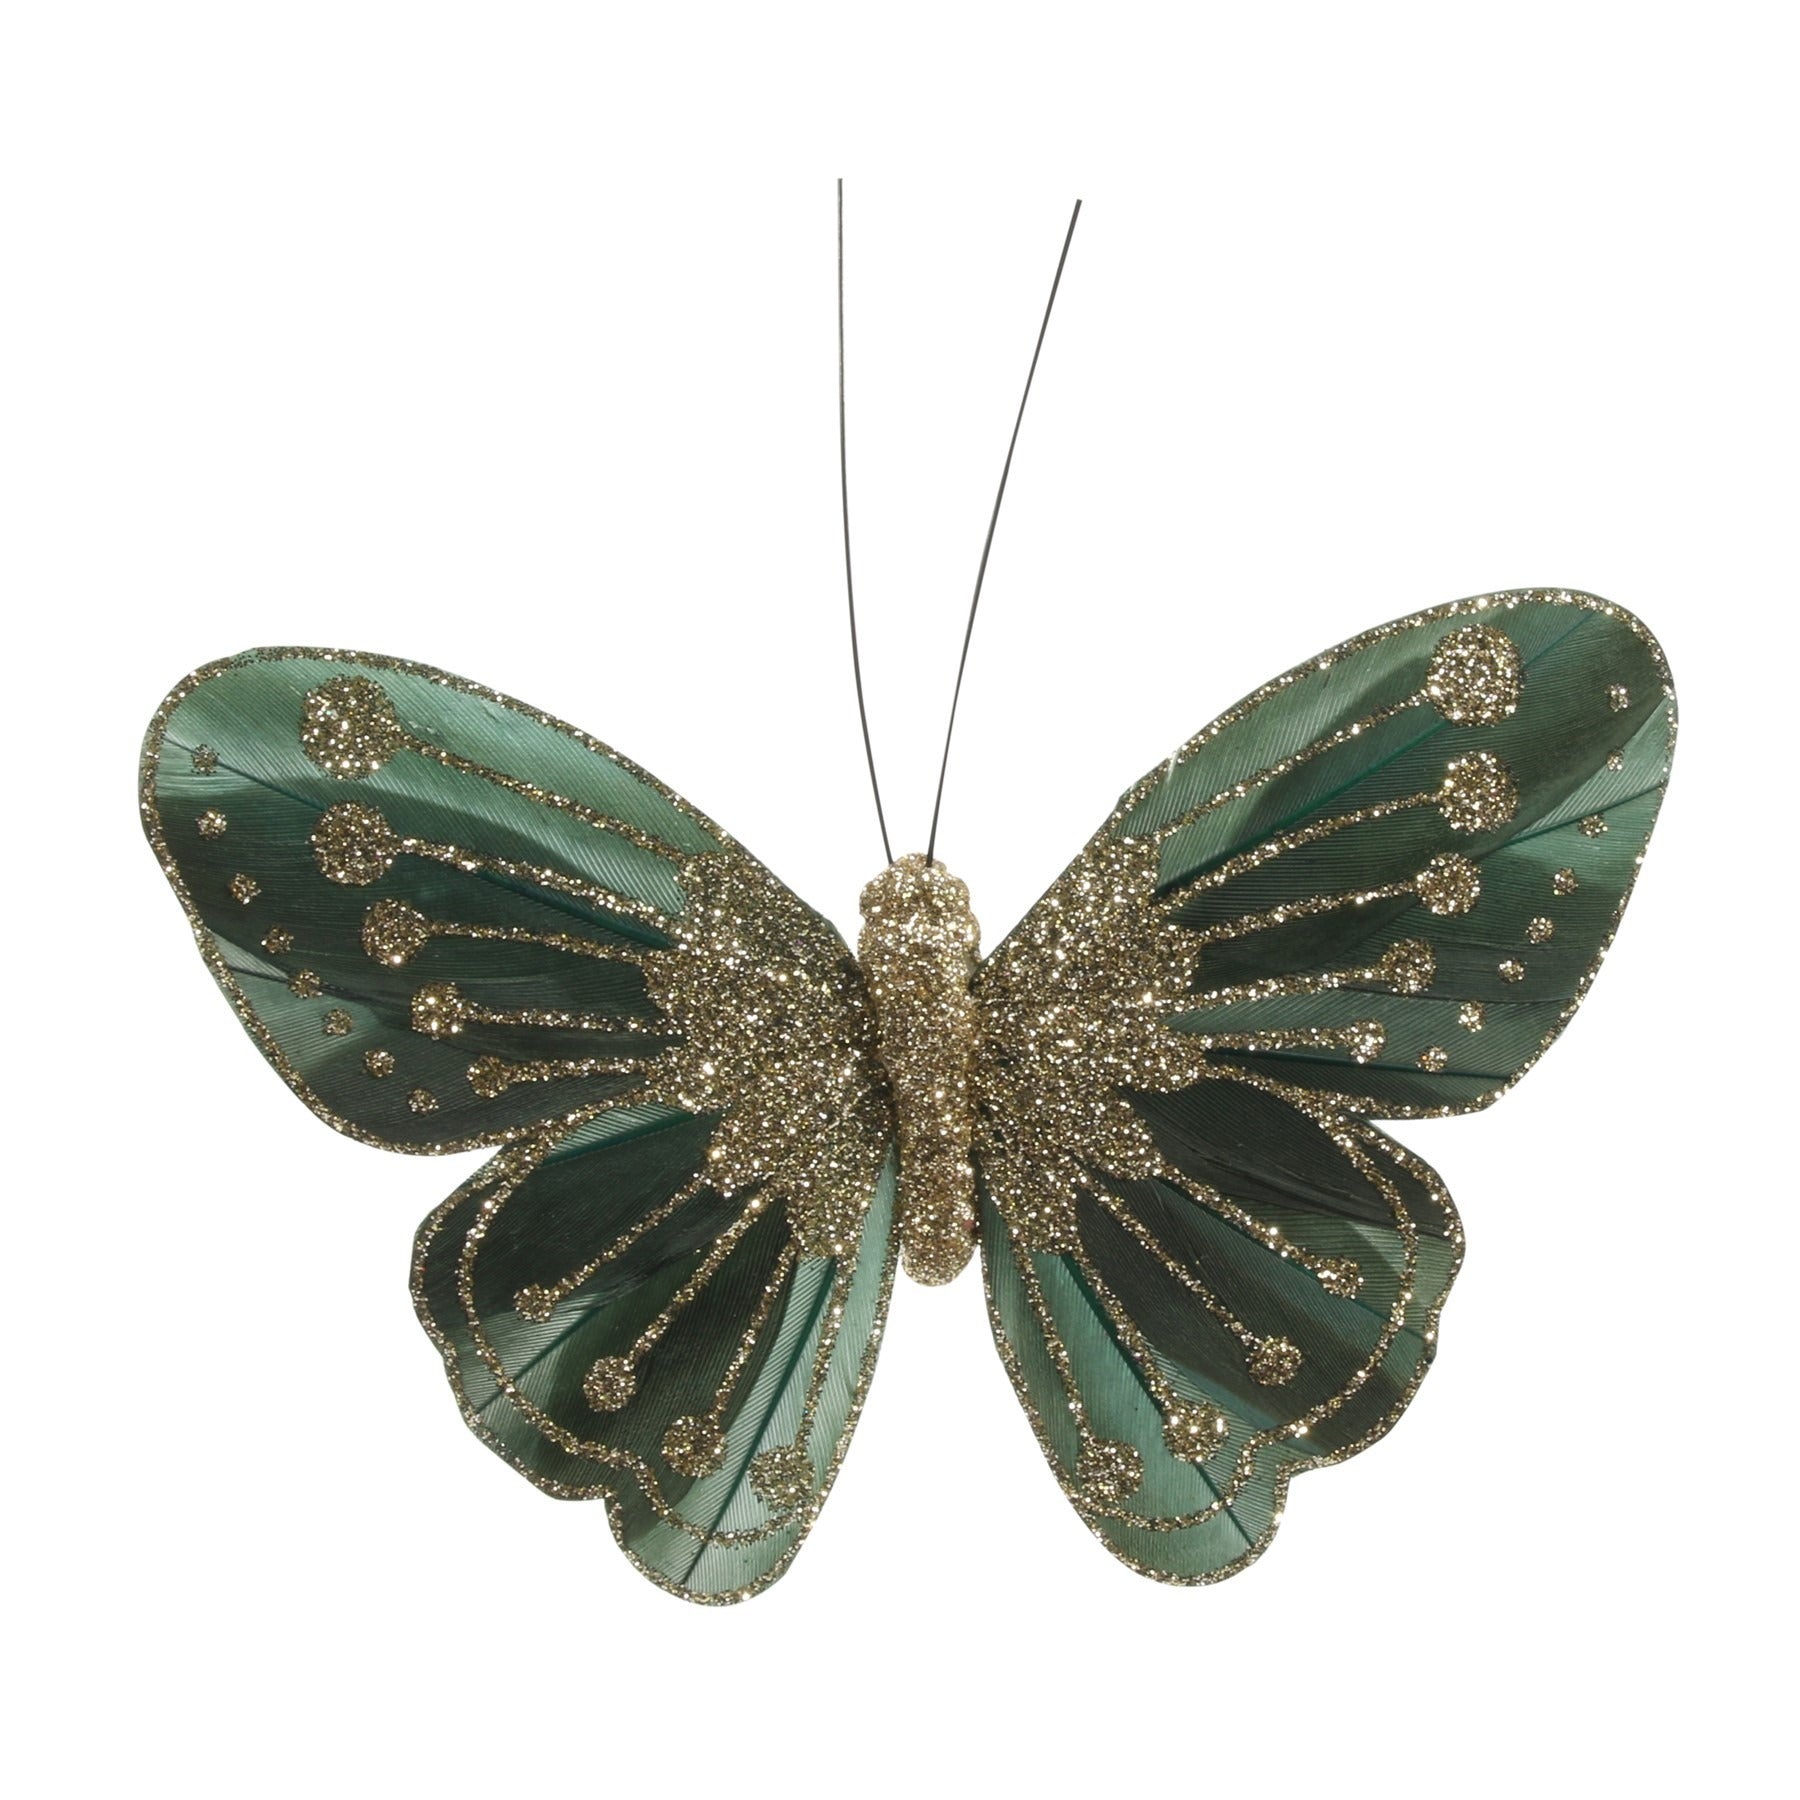 View 115cm Forest Green Feather Glitter Butterfly Pack of 12 information